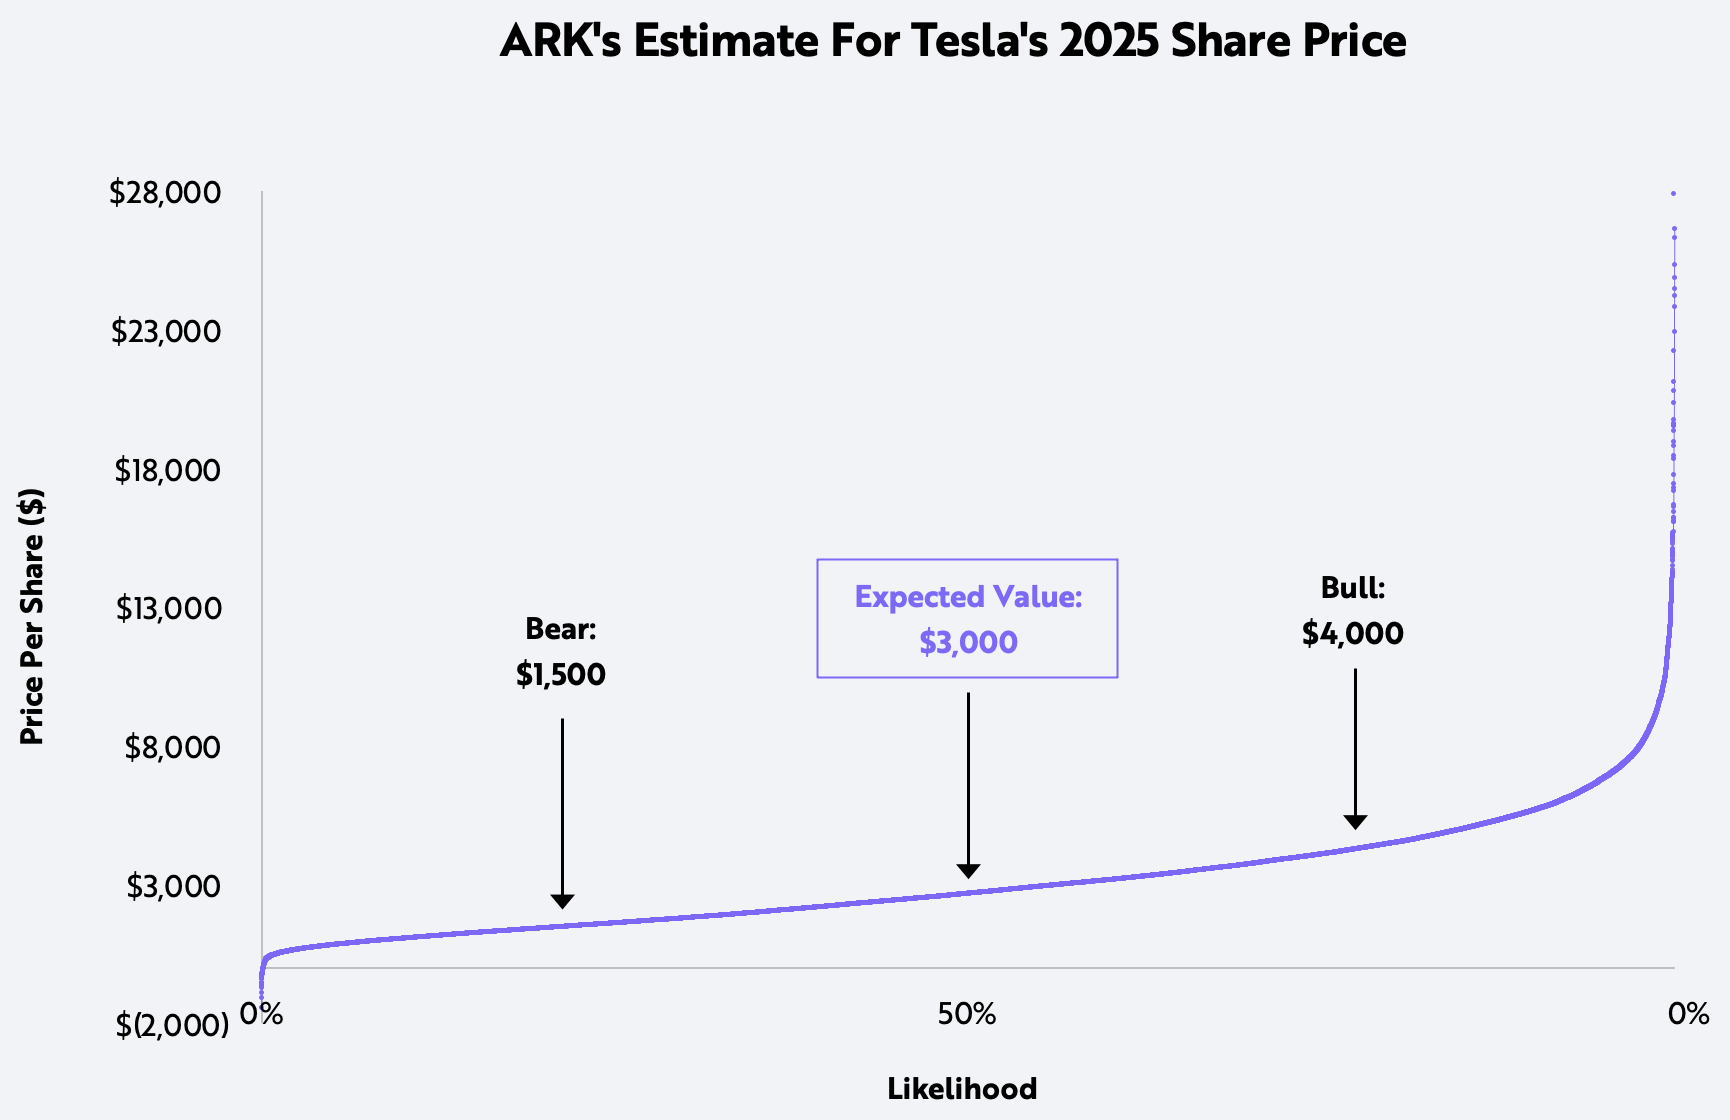 ARK’s Price Target for Tesla in 2025 is 3,000 Per Share